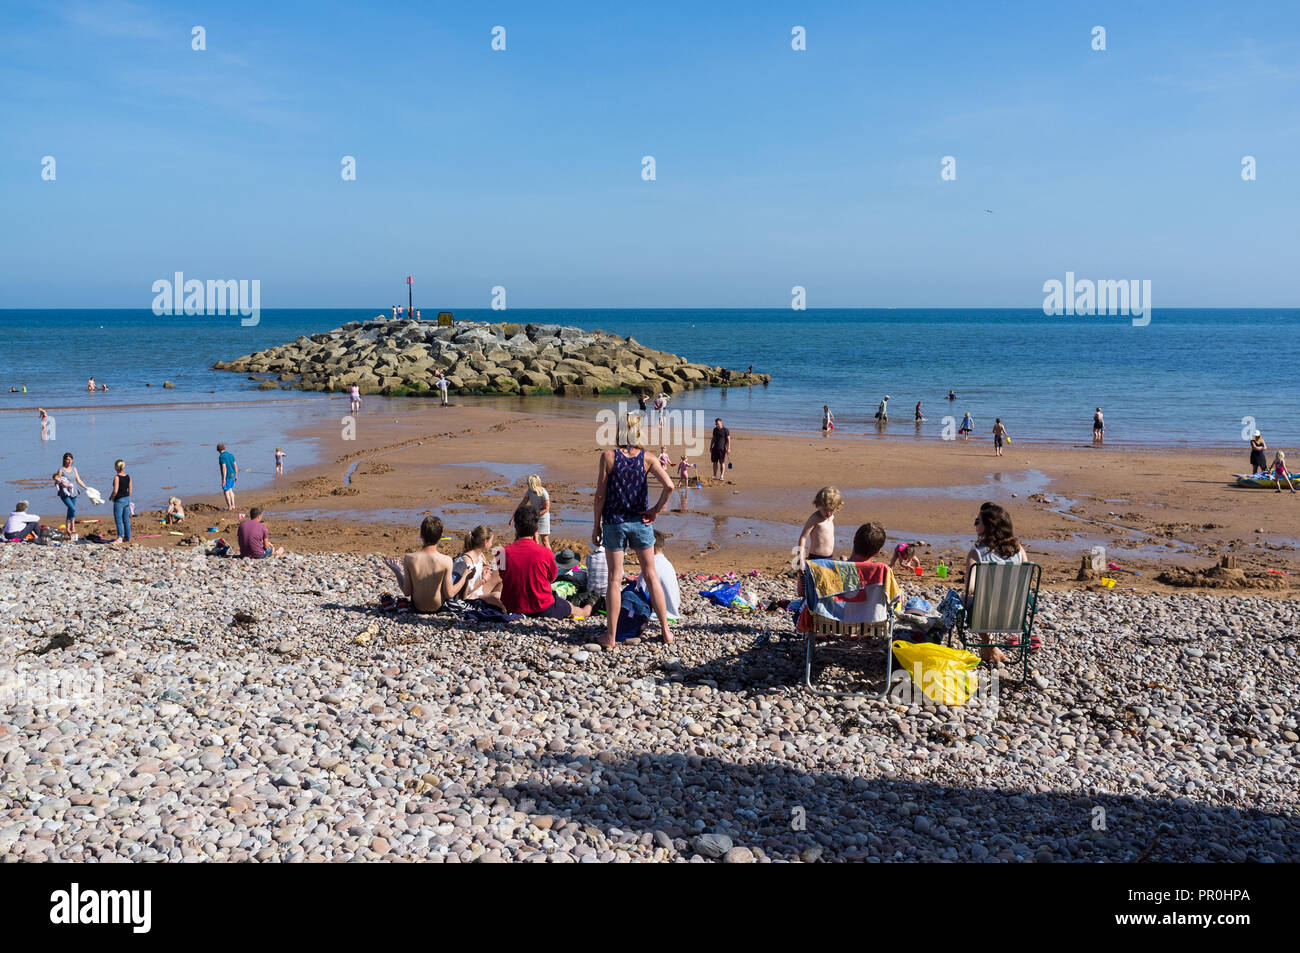 Sidmouth, Devon. A summer beach scene with blue skies and many local people and holiday makers. Stock Photo